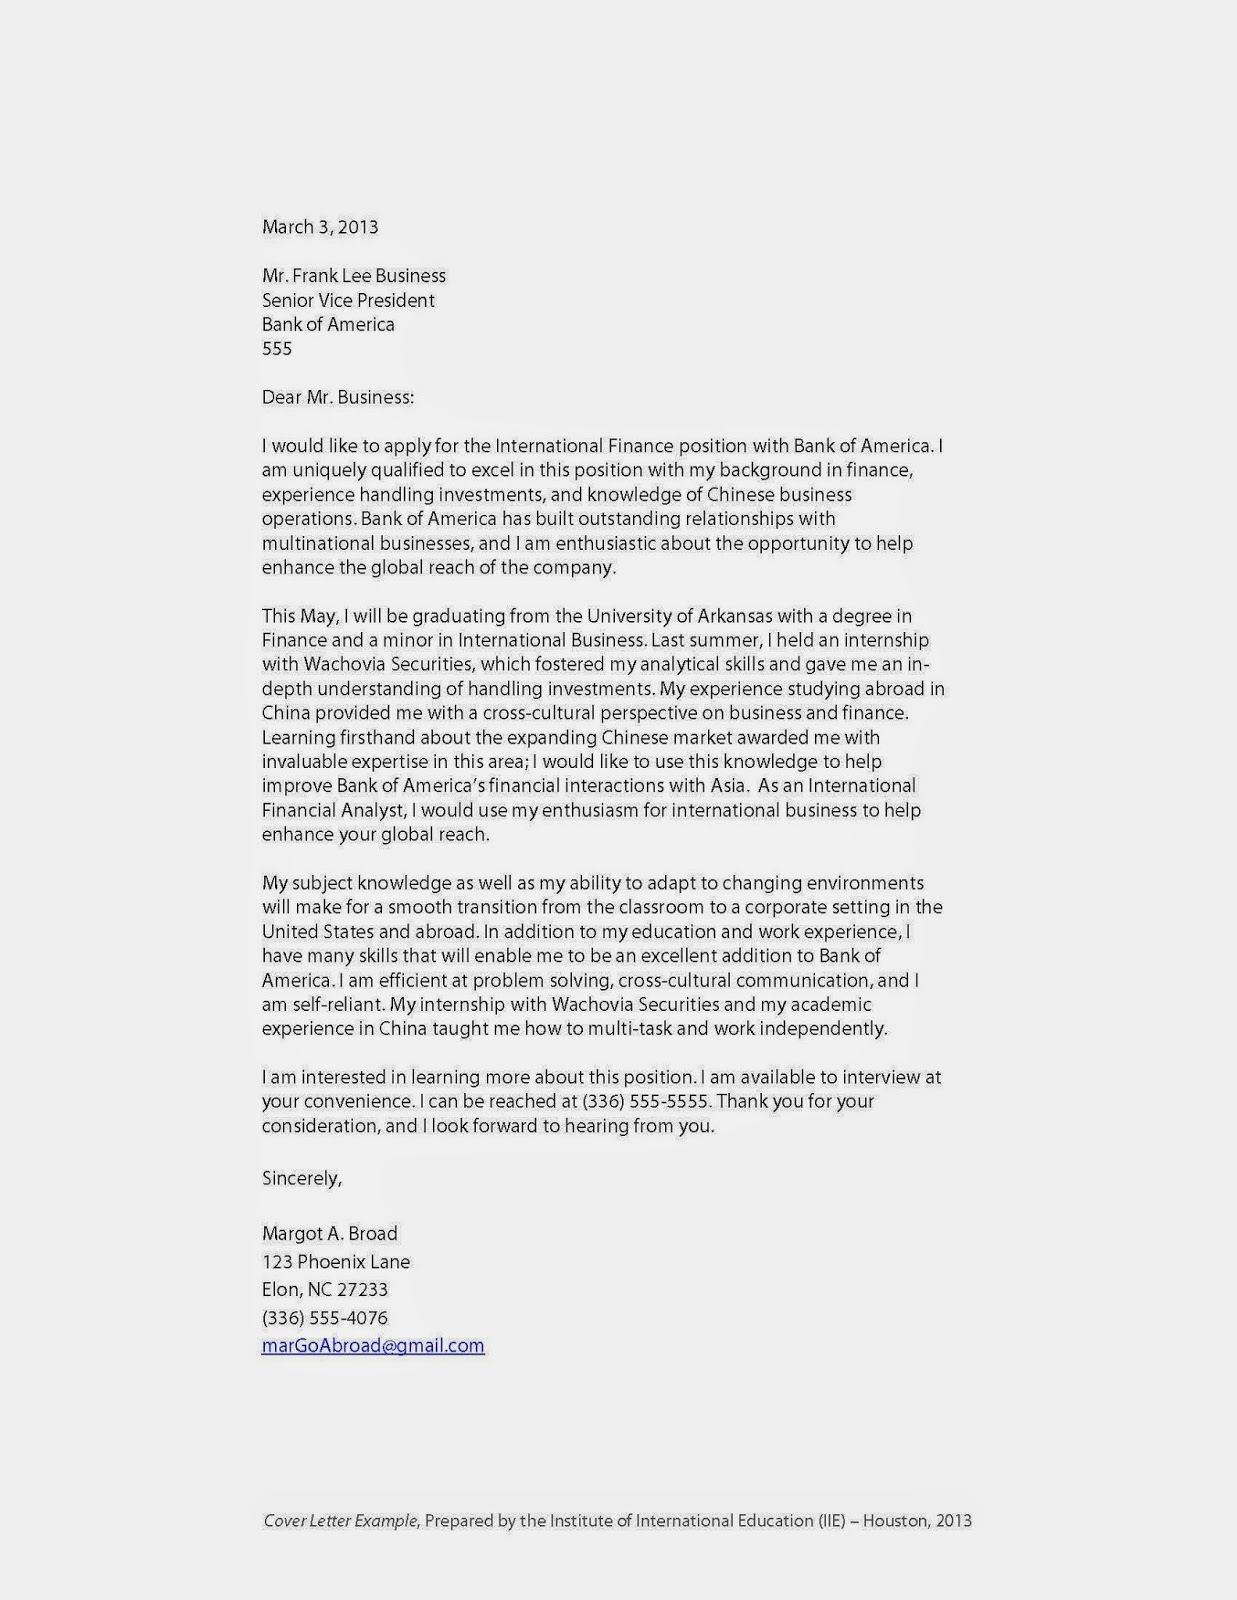 Intern architect cover letter examples